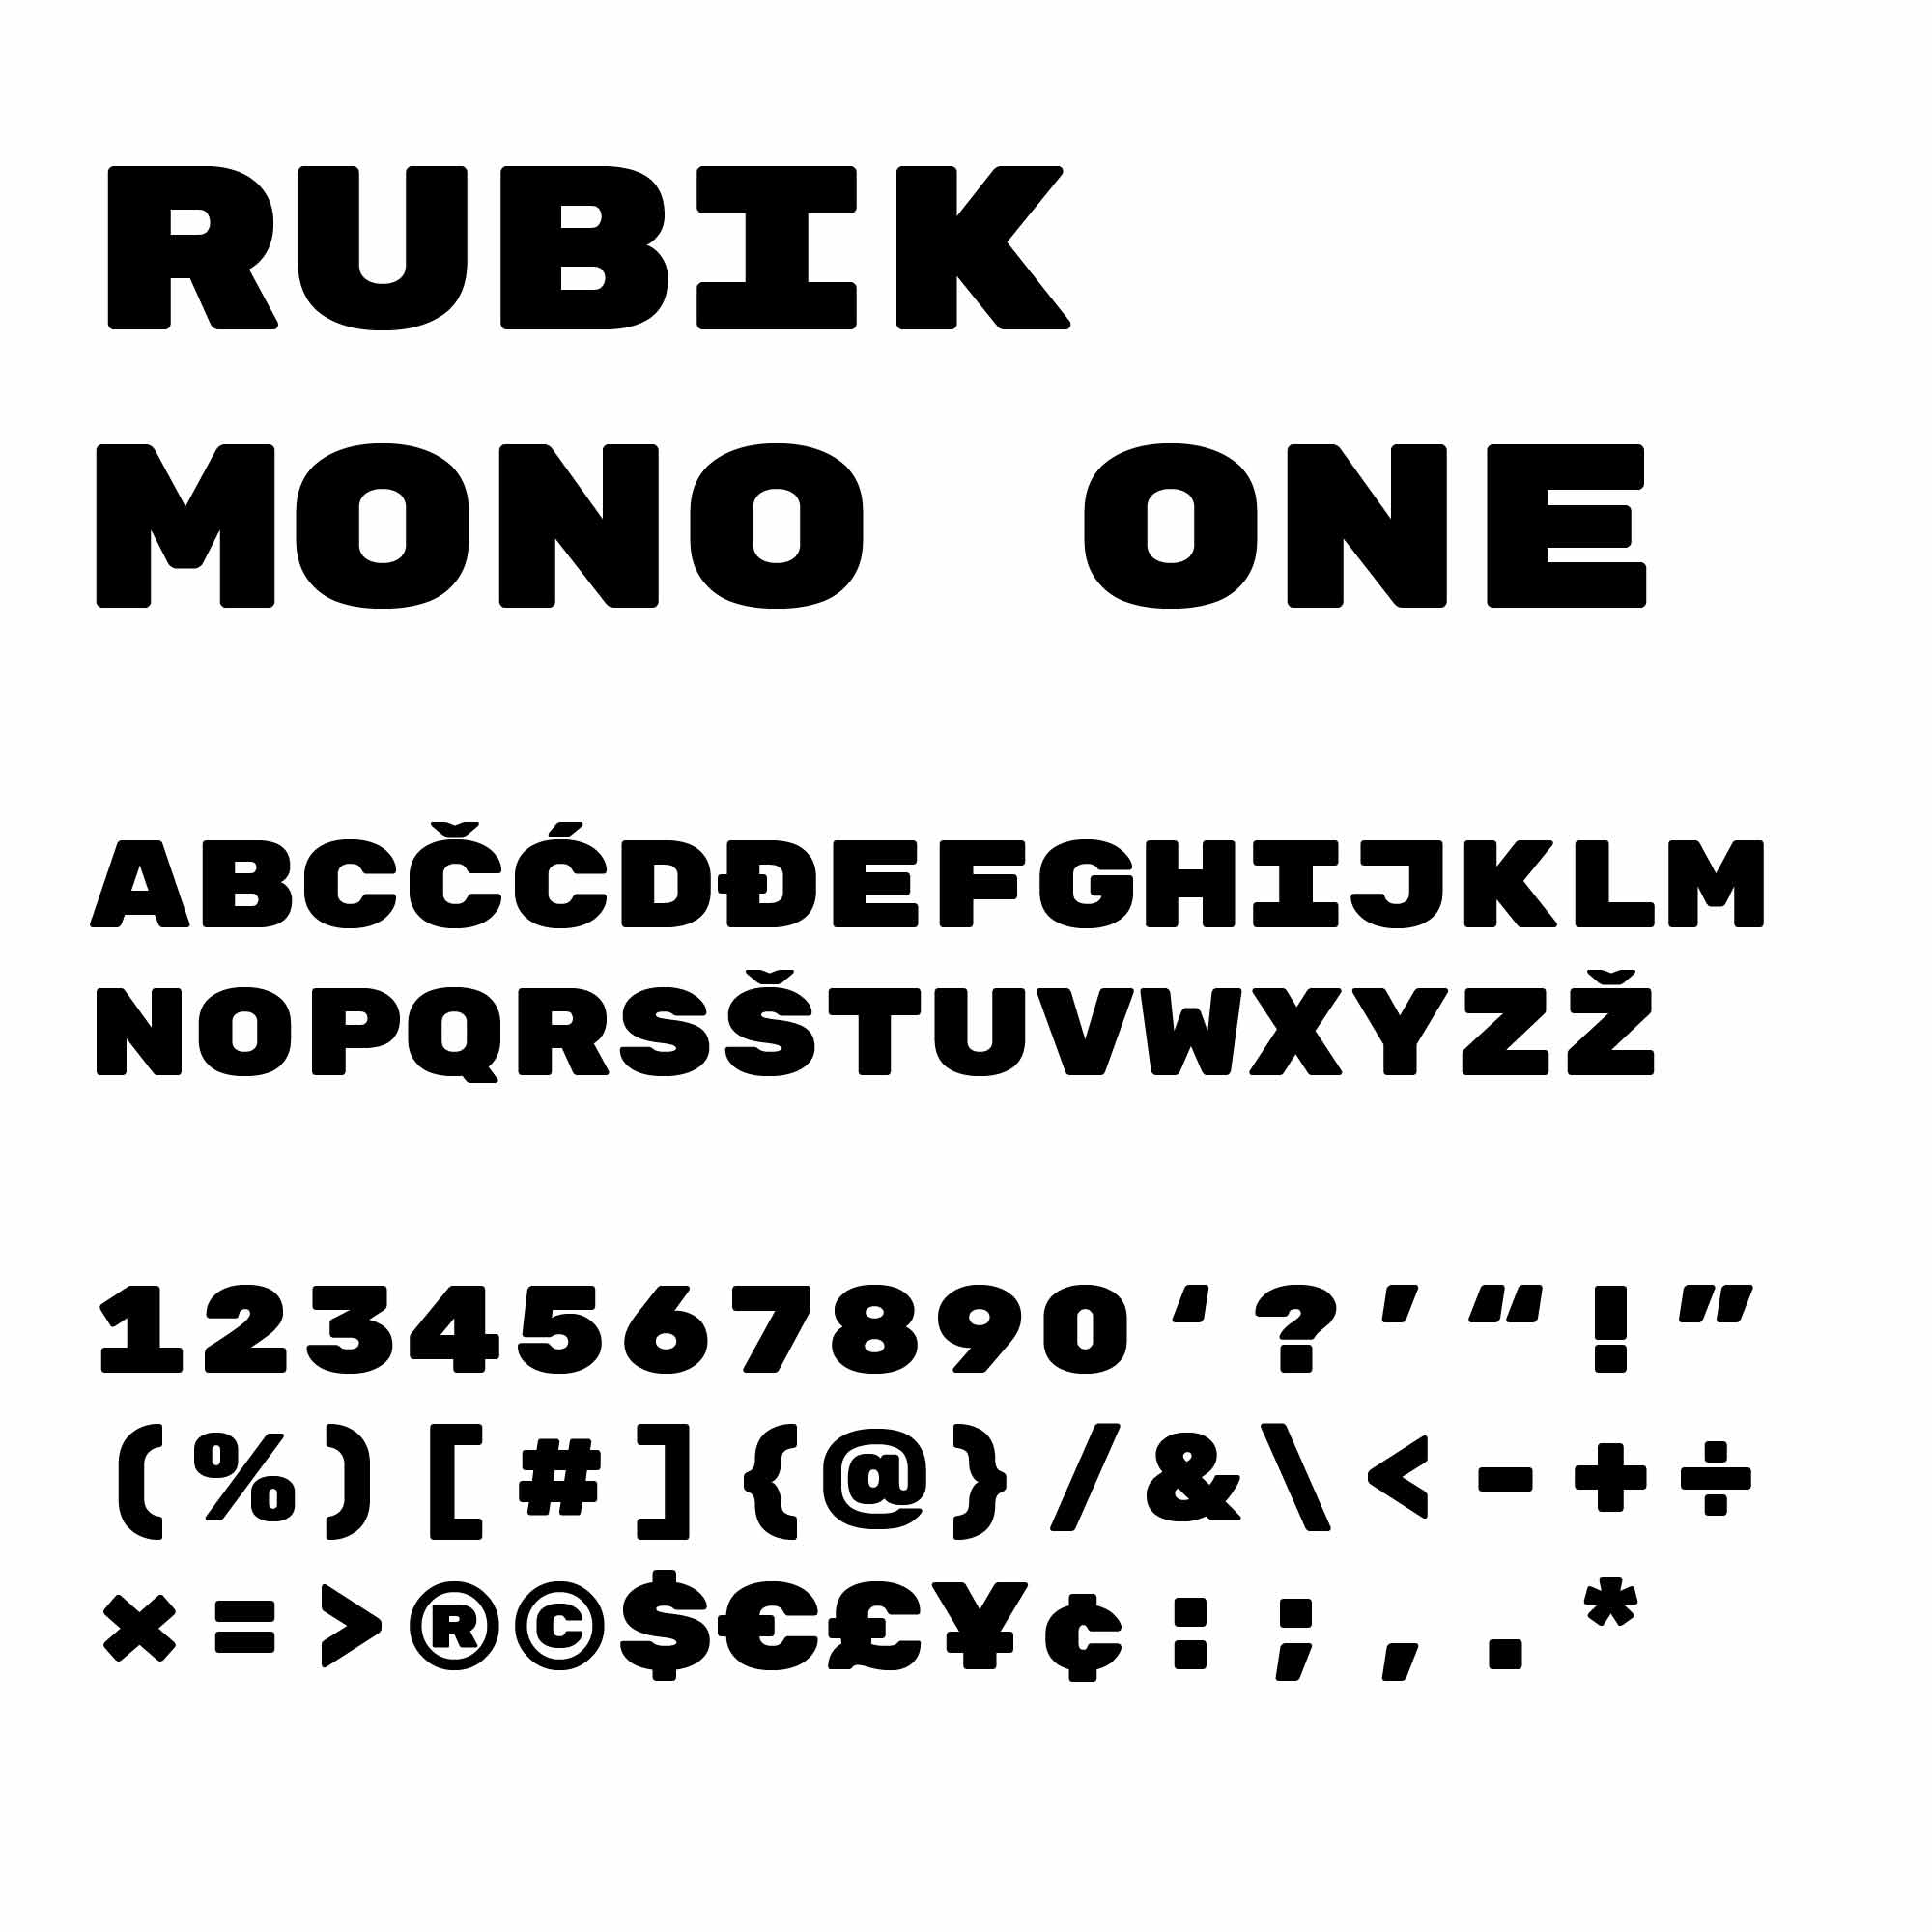 Image of the typeface used in the RTTR brand